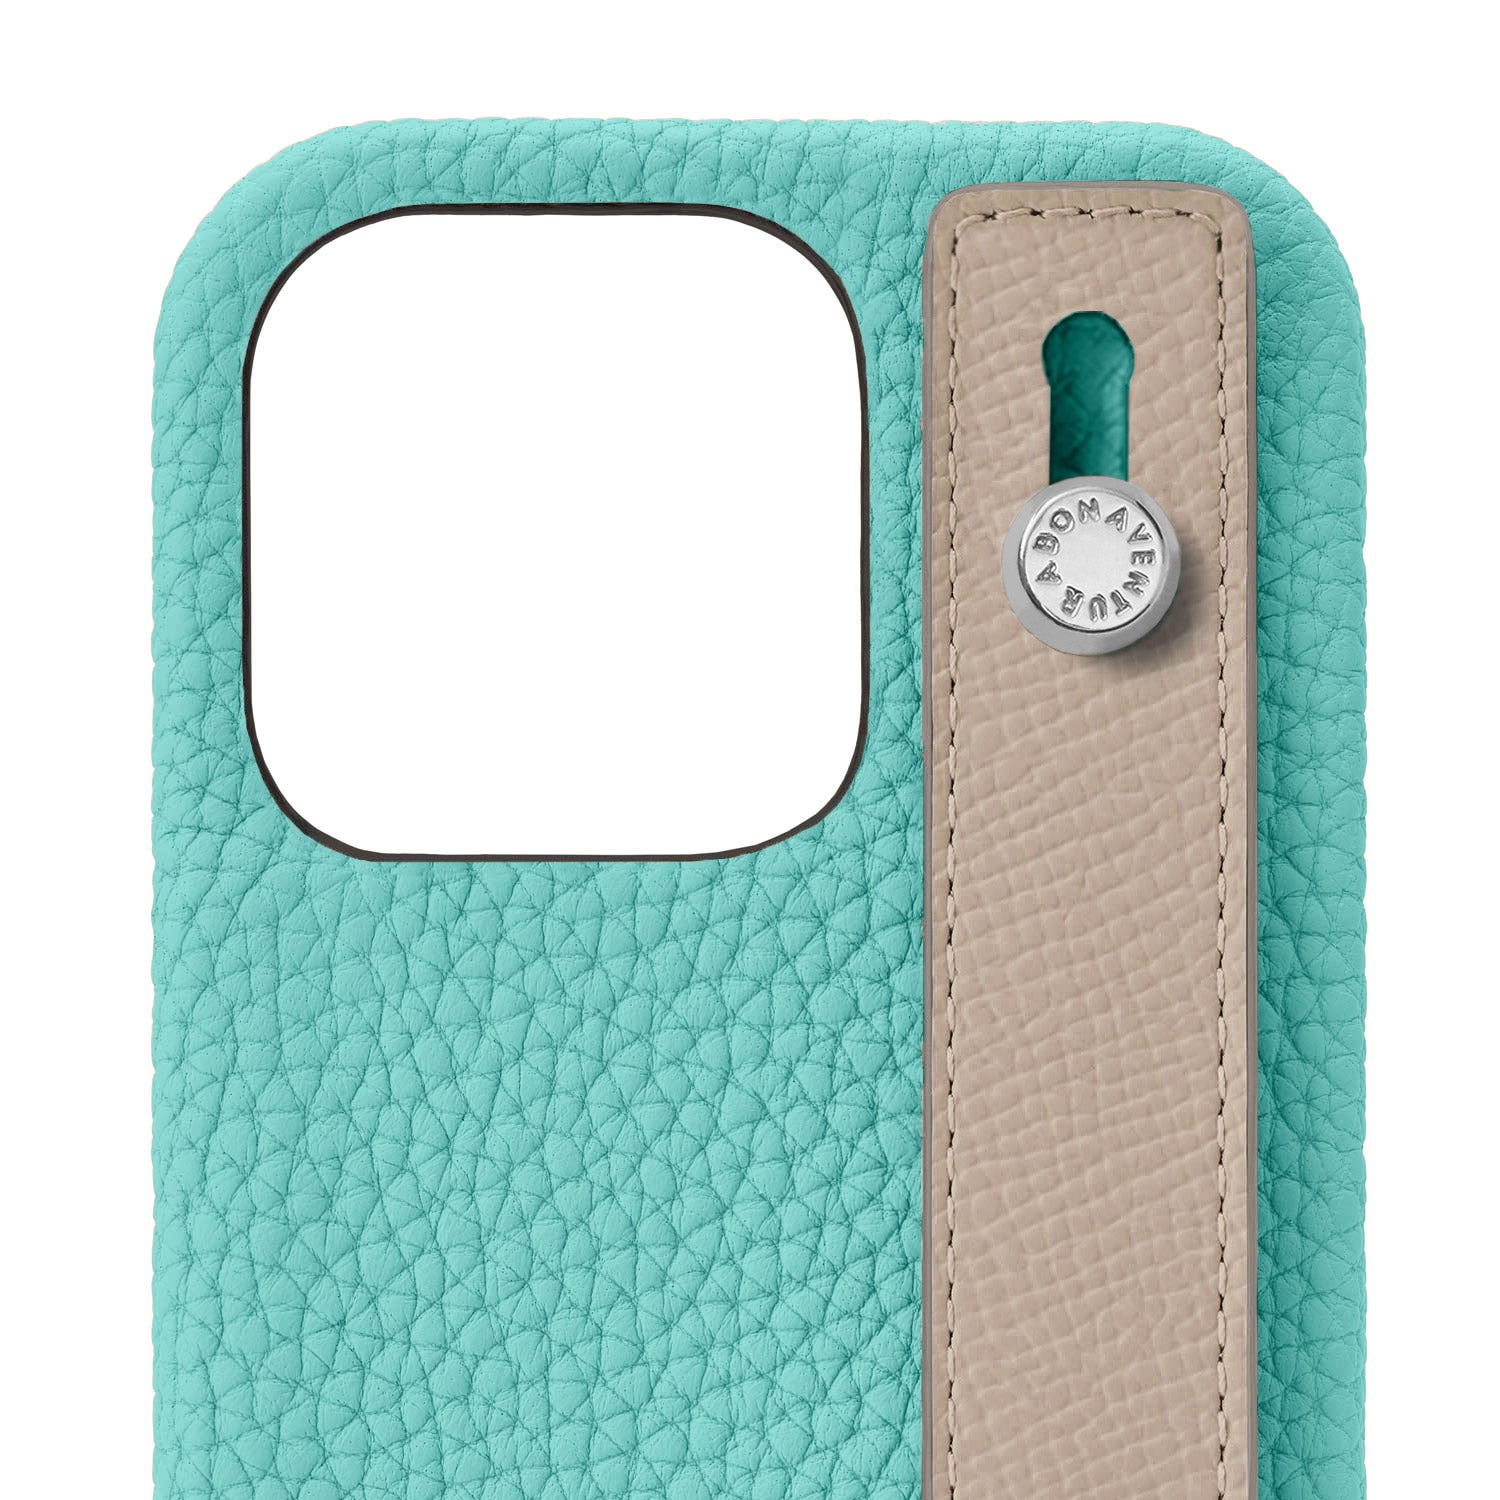 (iPhone 14 Pro) Back cover case with handle, shrink leather